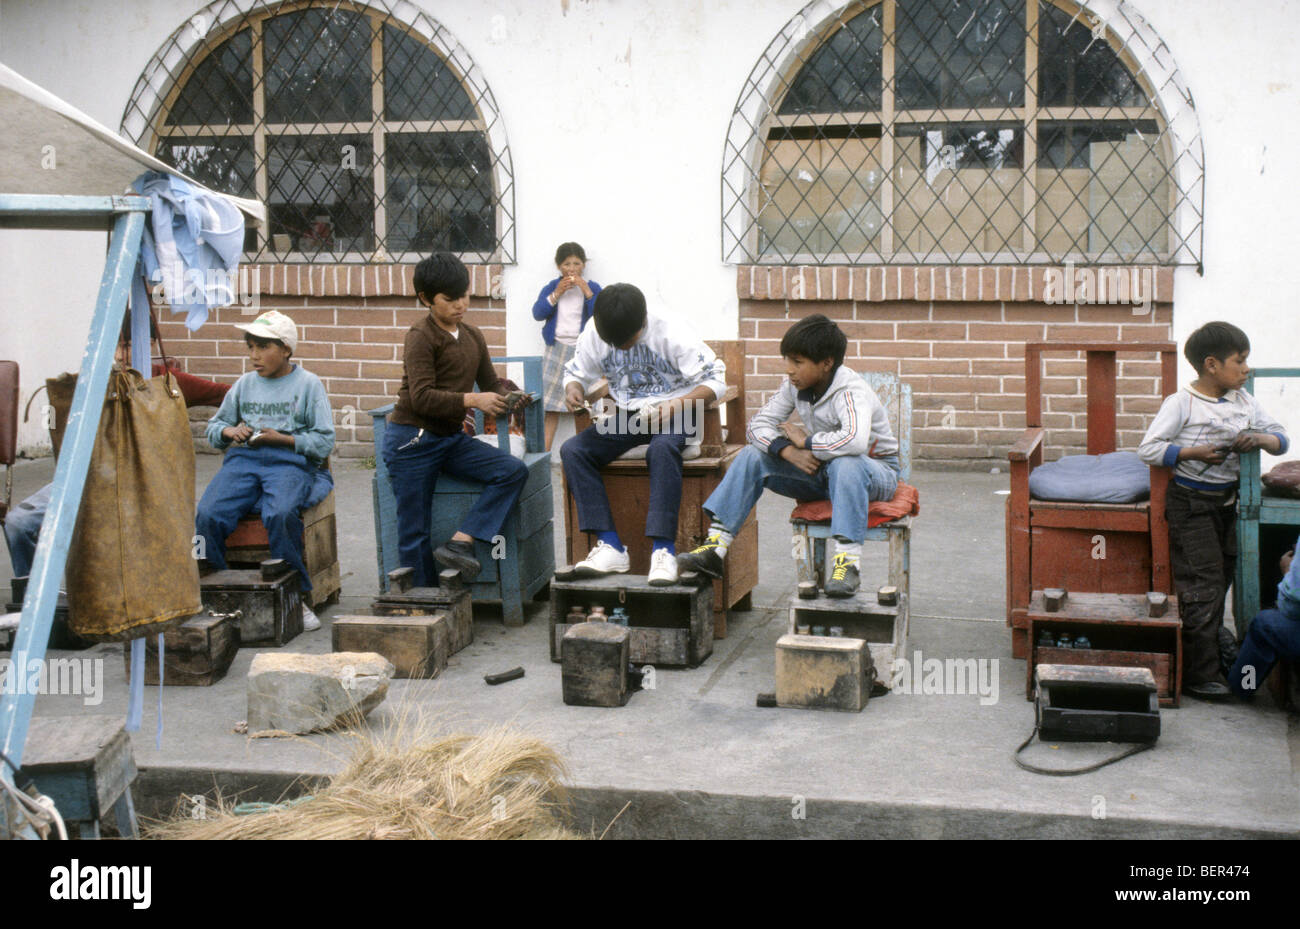 Line of young boys and shoe shine chairs waiting for customers Ecuador Market. Stock Photo